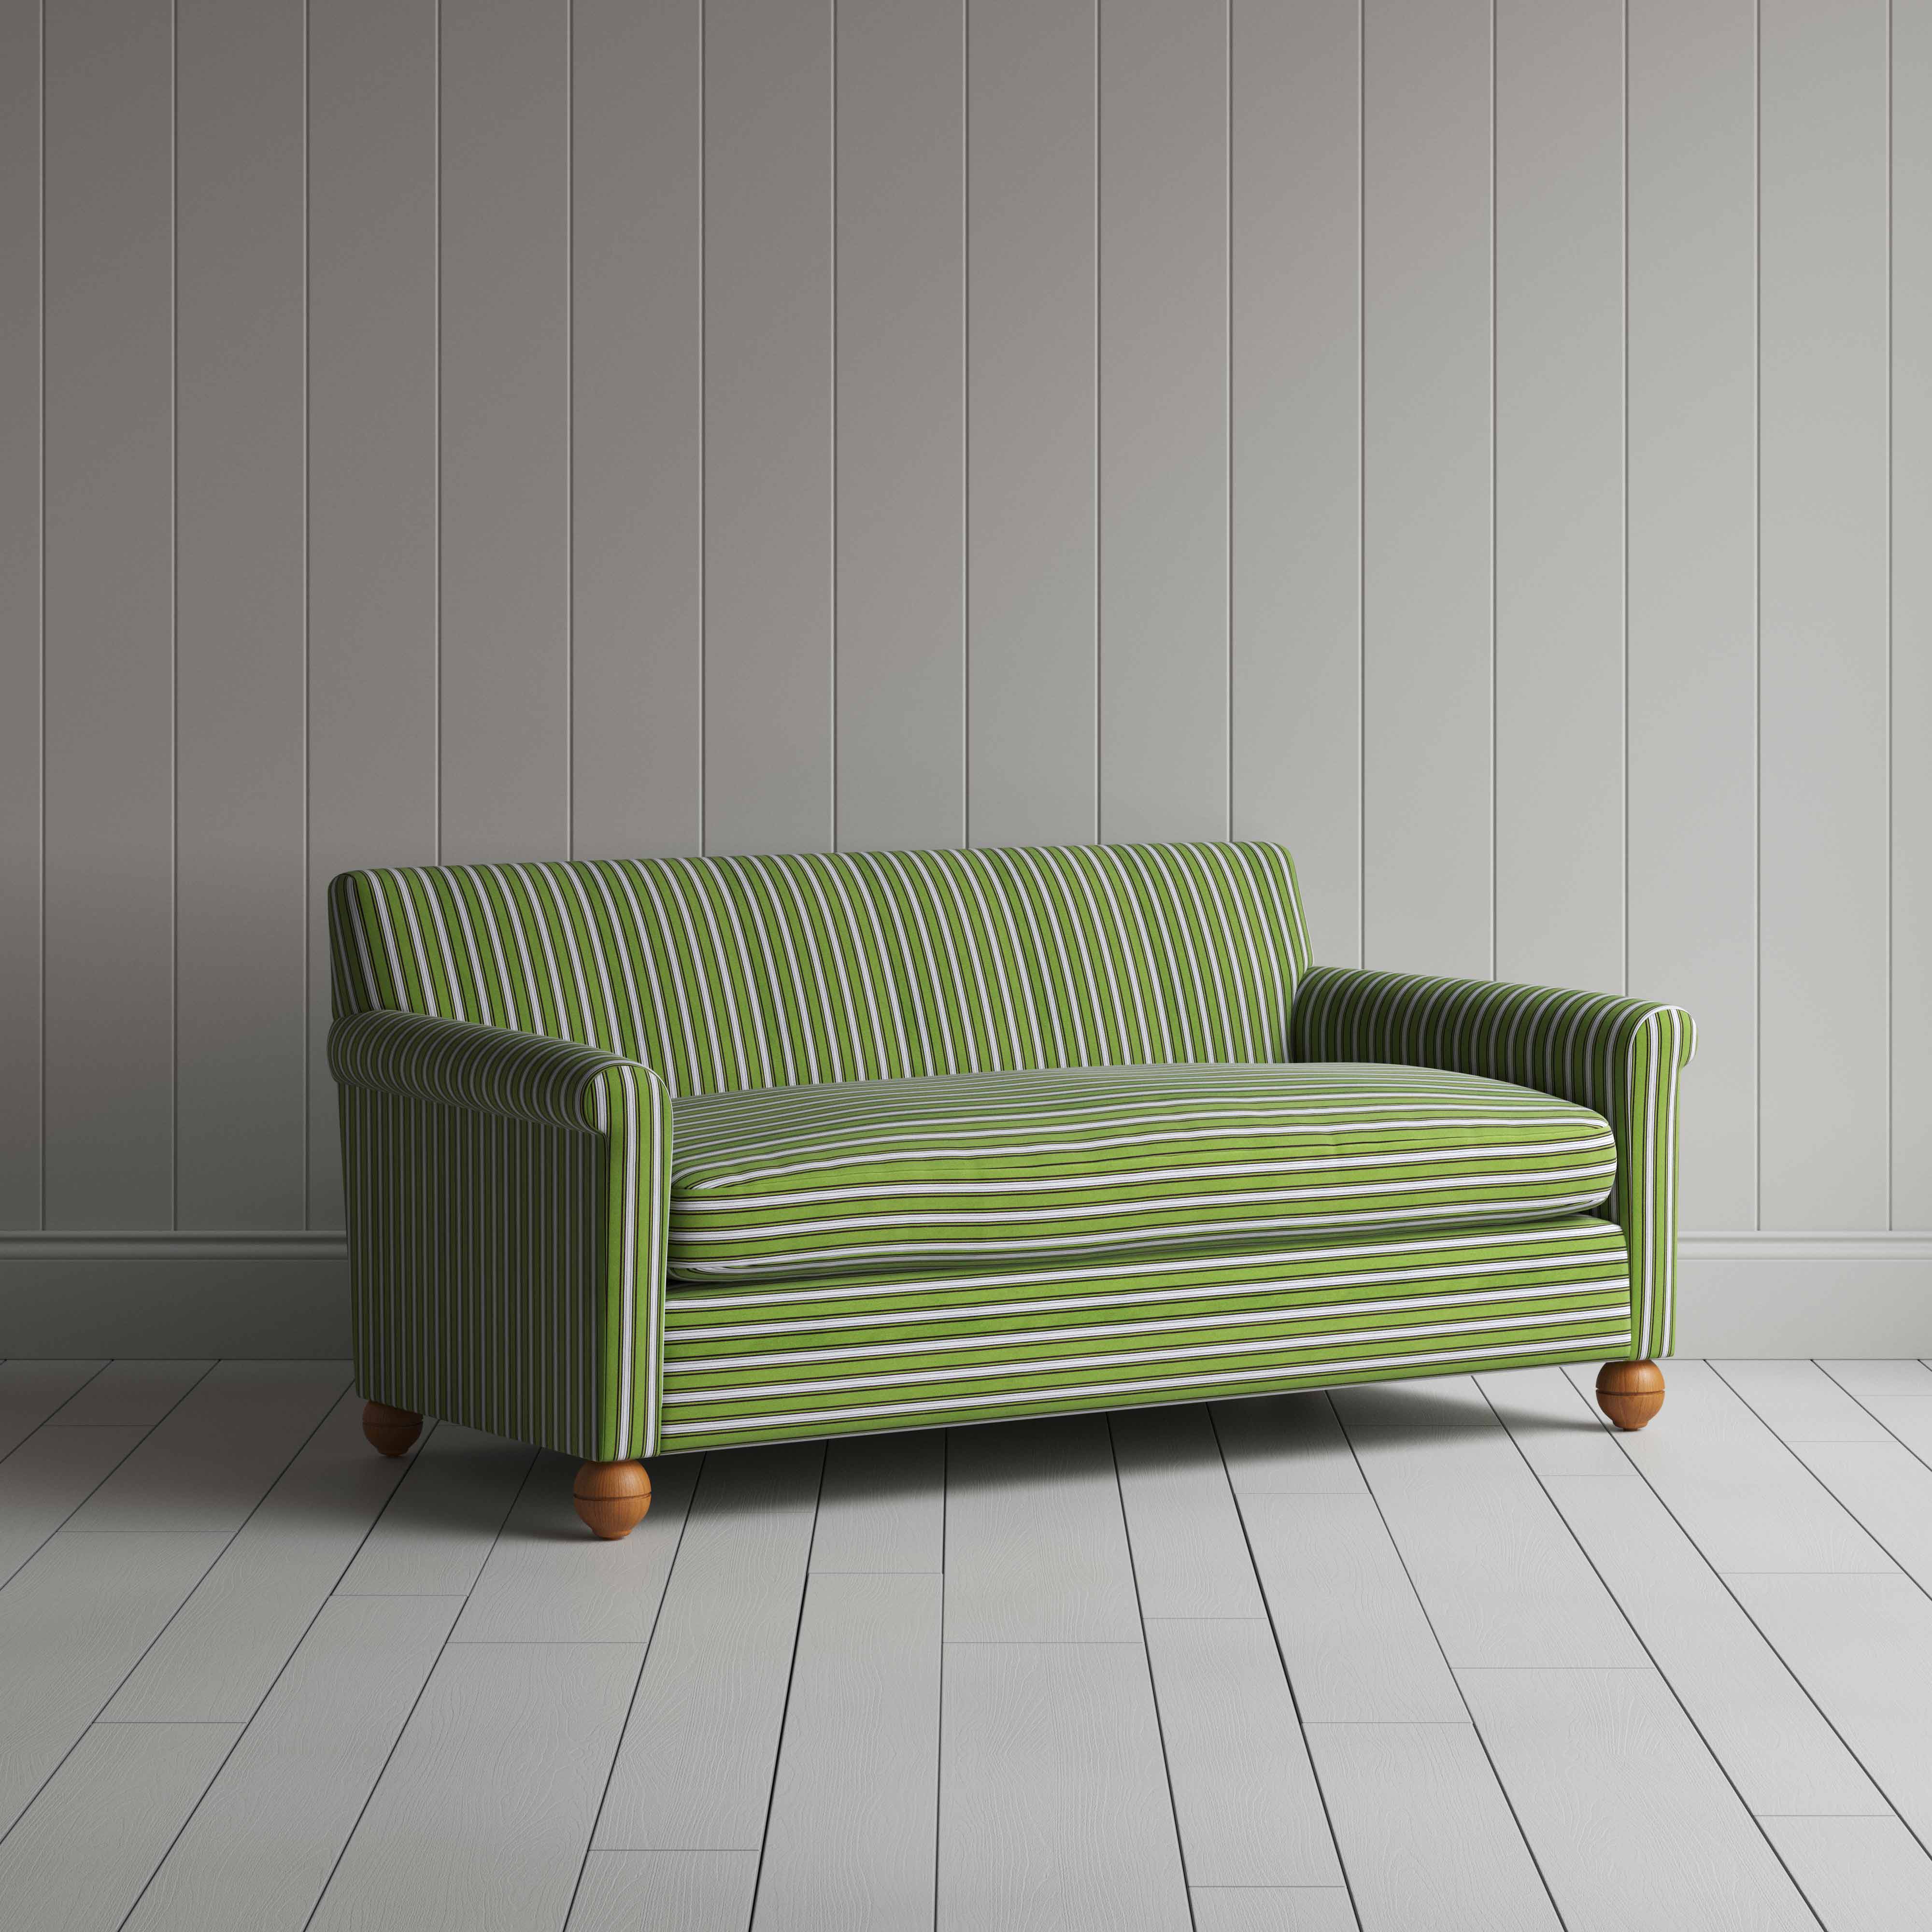  Idler 3 Seater Sofa in Colonnade Cotton, Green and Wine 